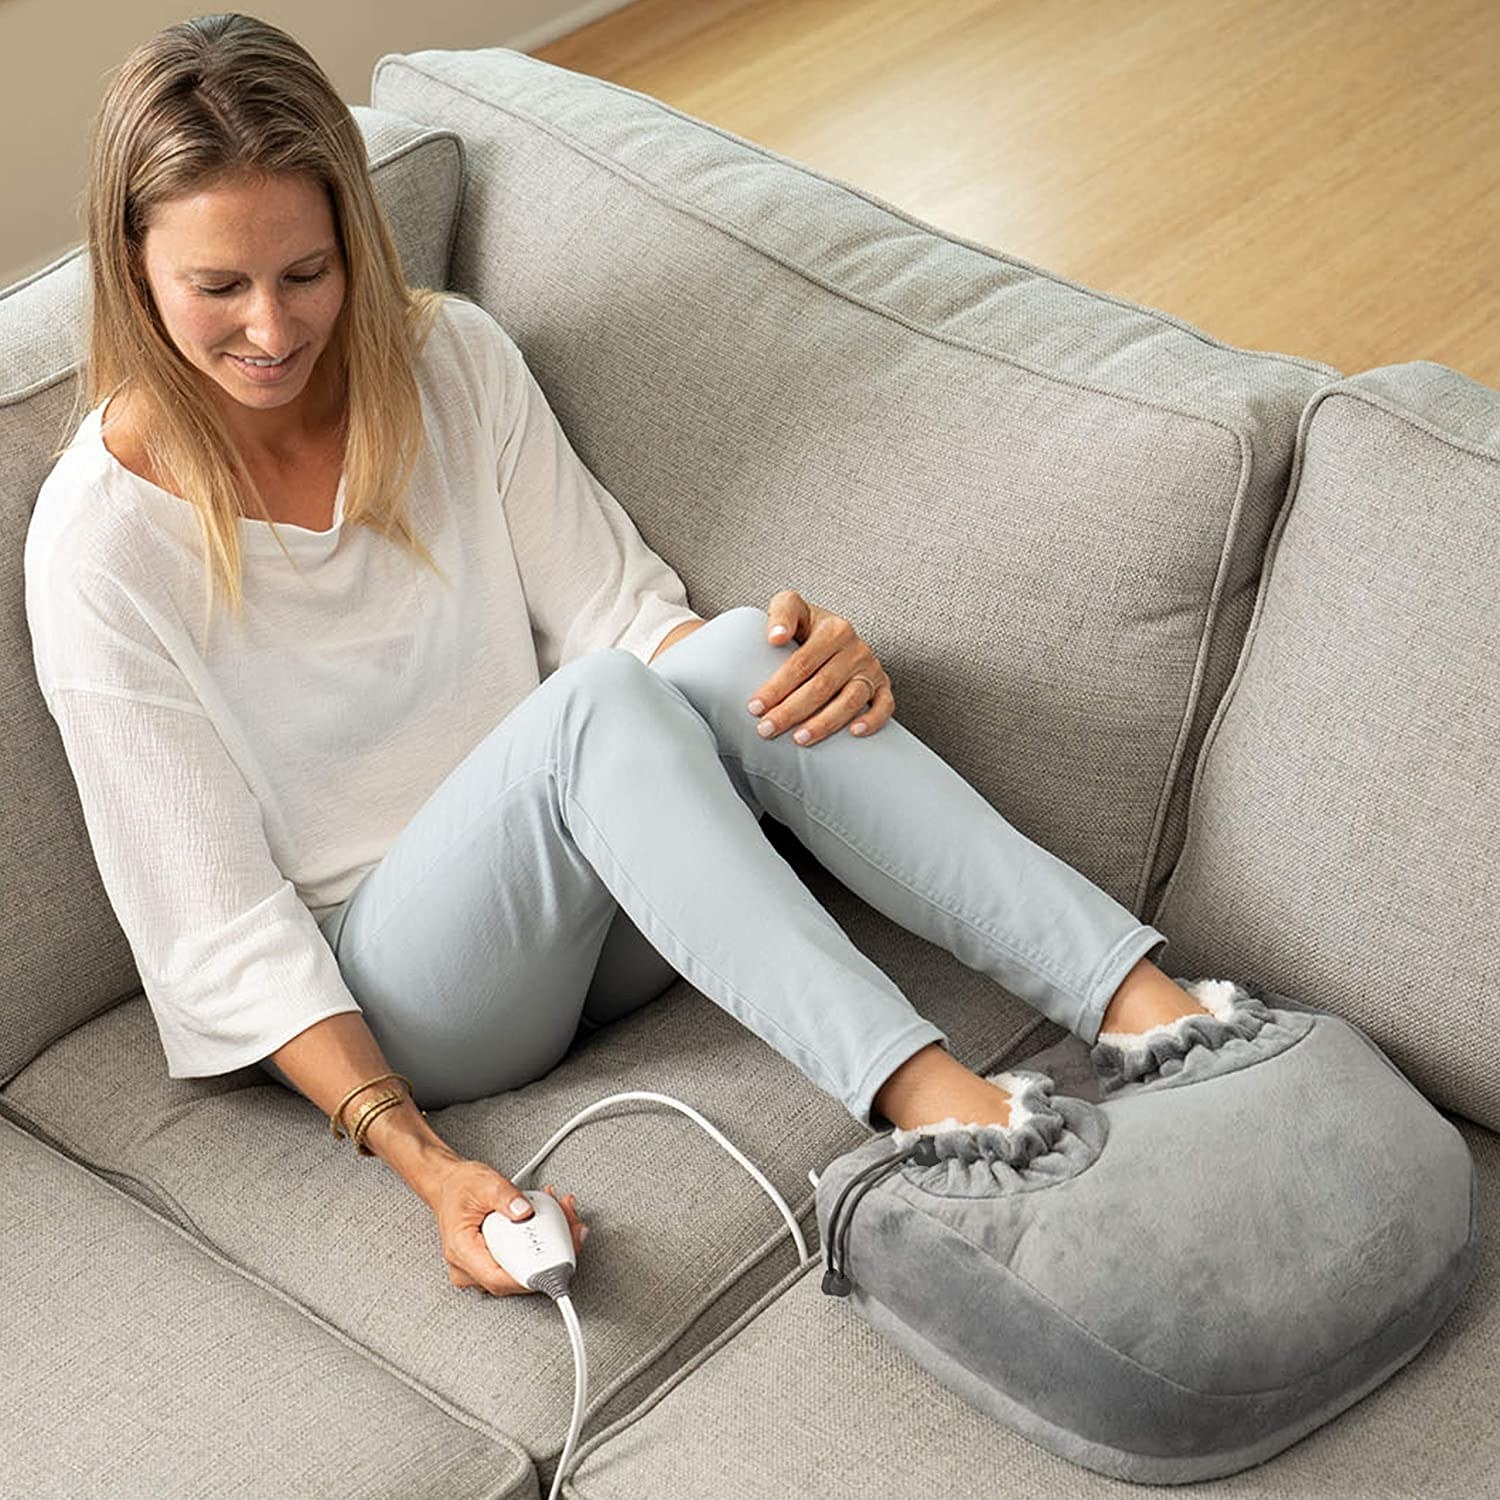 Person on sofa with feet inside large plush foot heater, with one hole per foot and cinches to make it extra secure